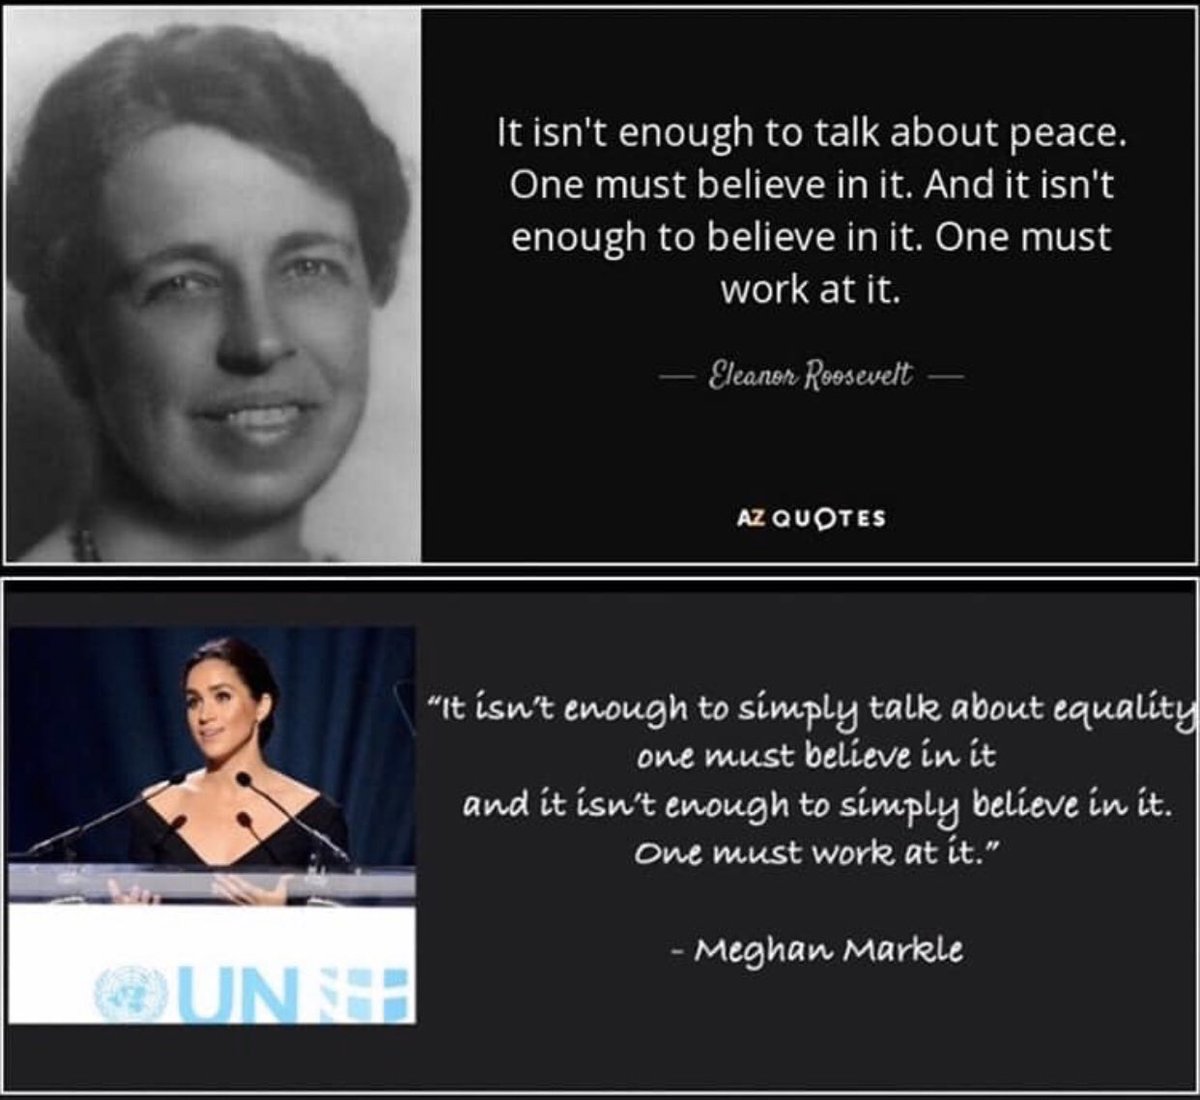 Continuation of 27. Speaking of Meghan.. since she’s so amazing at public speeches one would have to wonder why she takes so many quotes from other people...